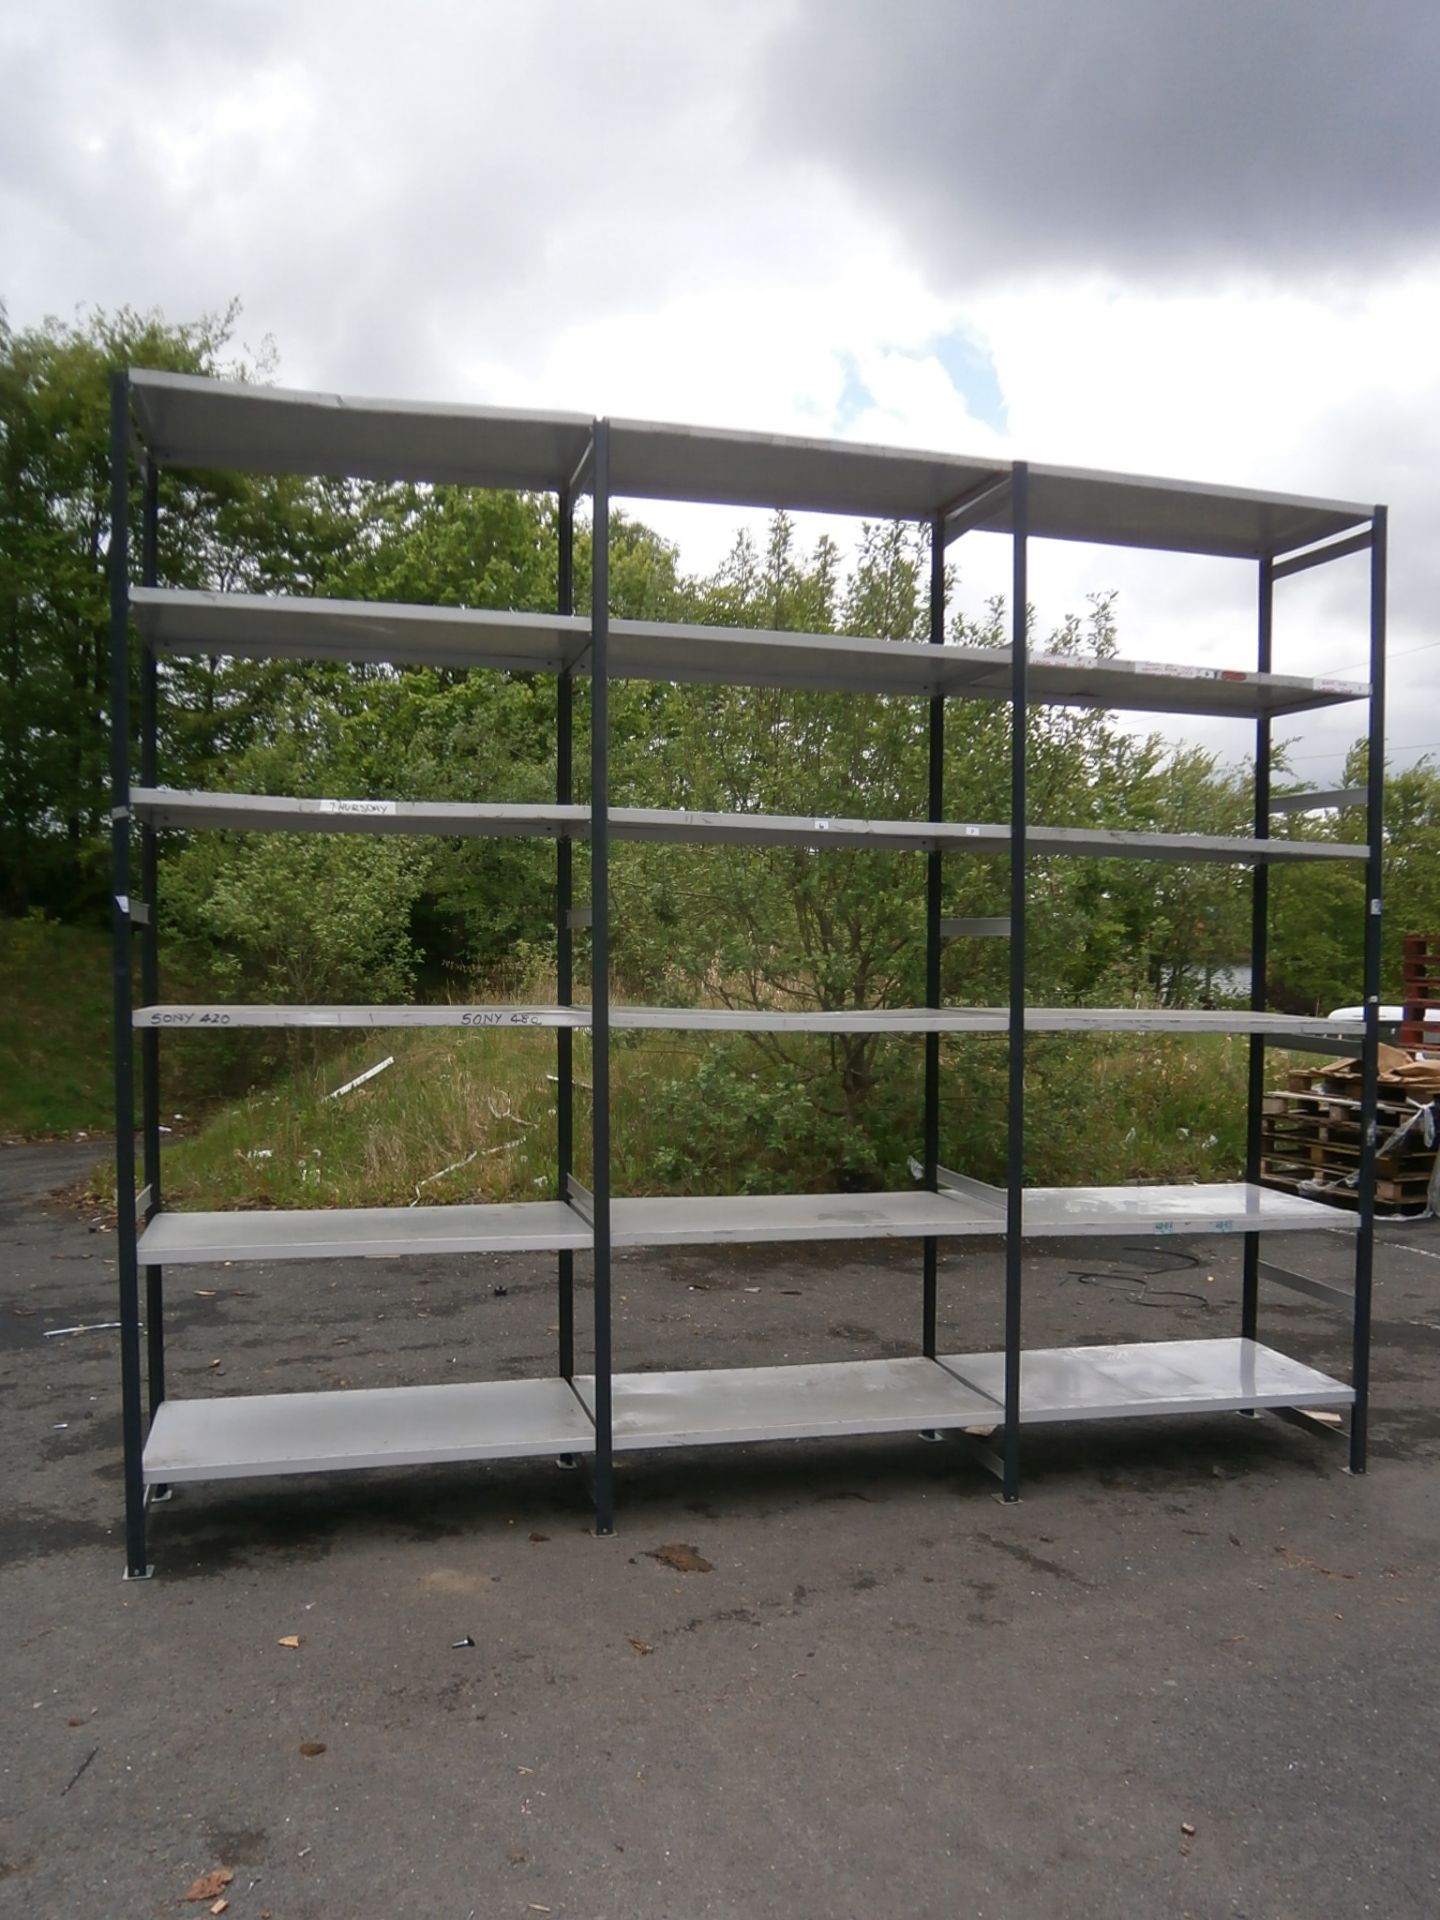 3 x Bays of Boltless Archive Shelving - Includes 4 x Uprights, 18 x Shelves and 72 Clips (Approx Per